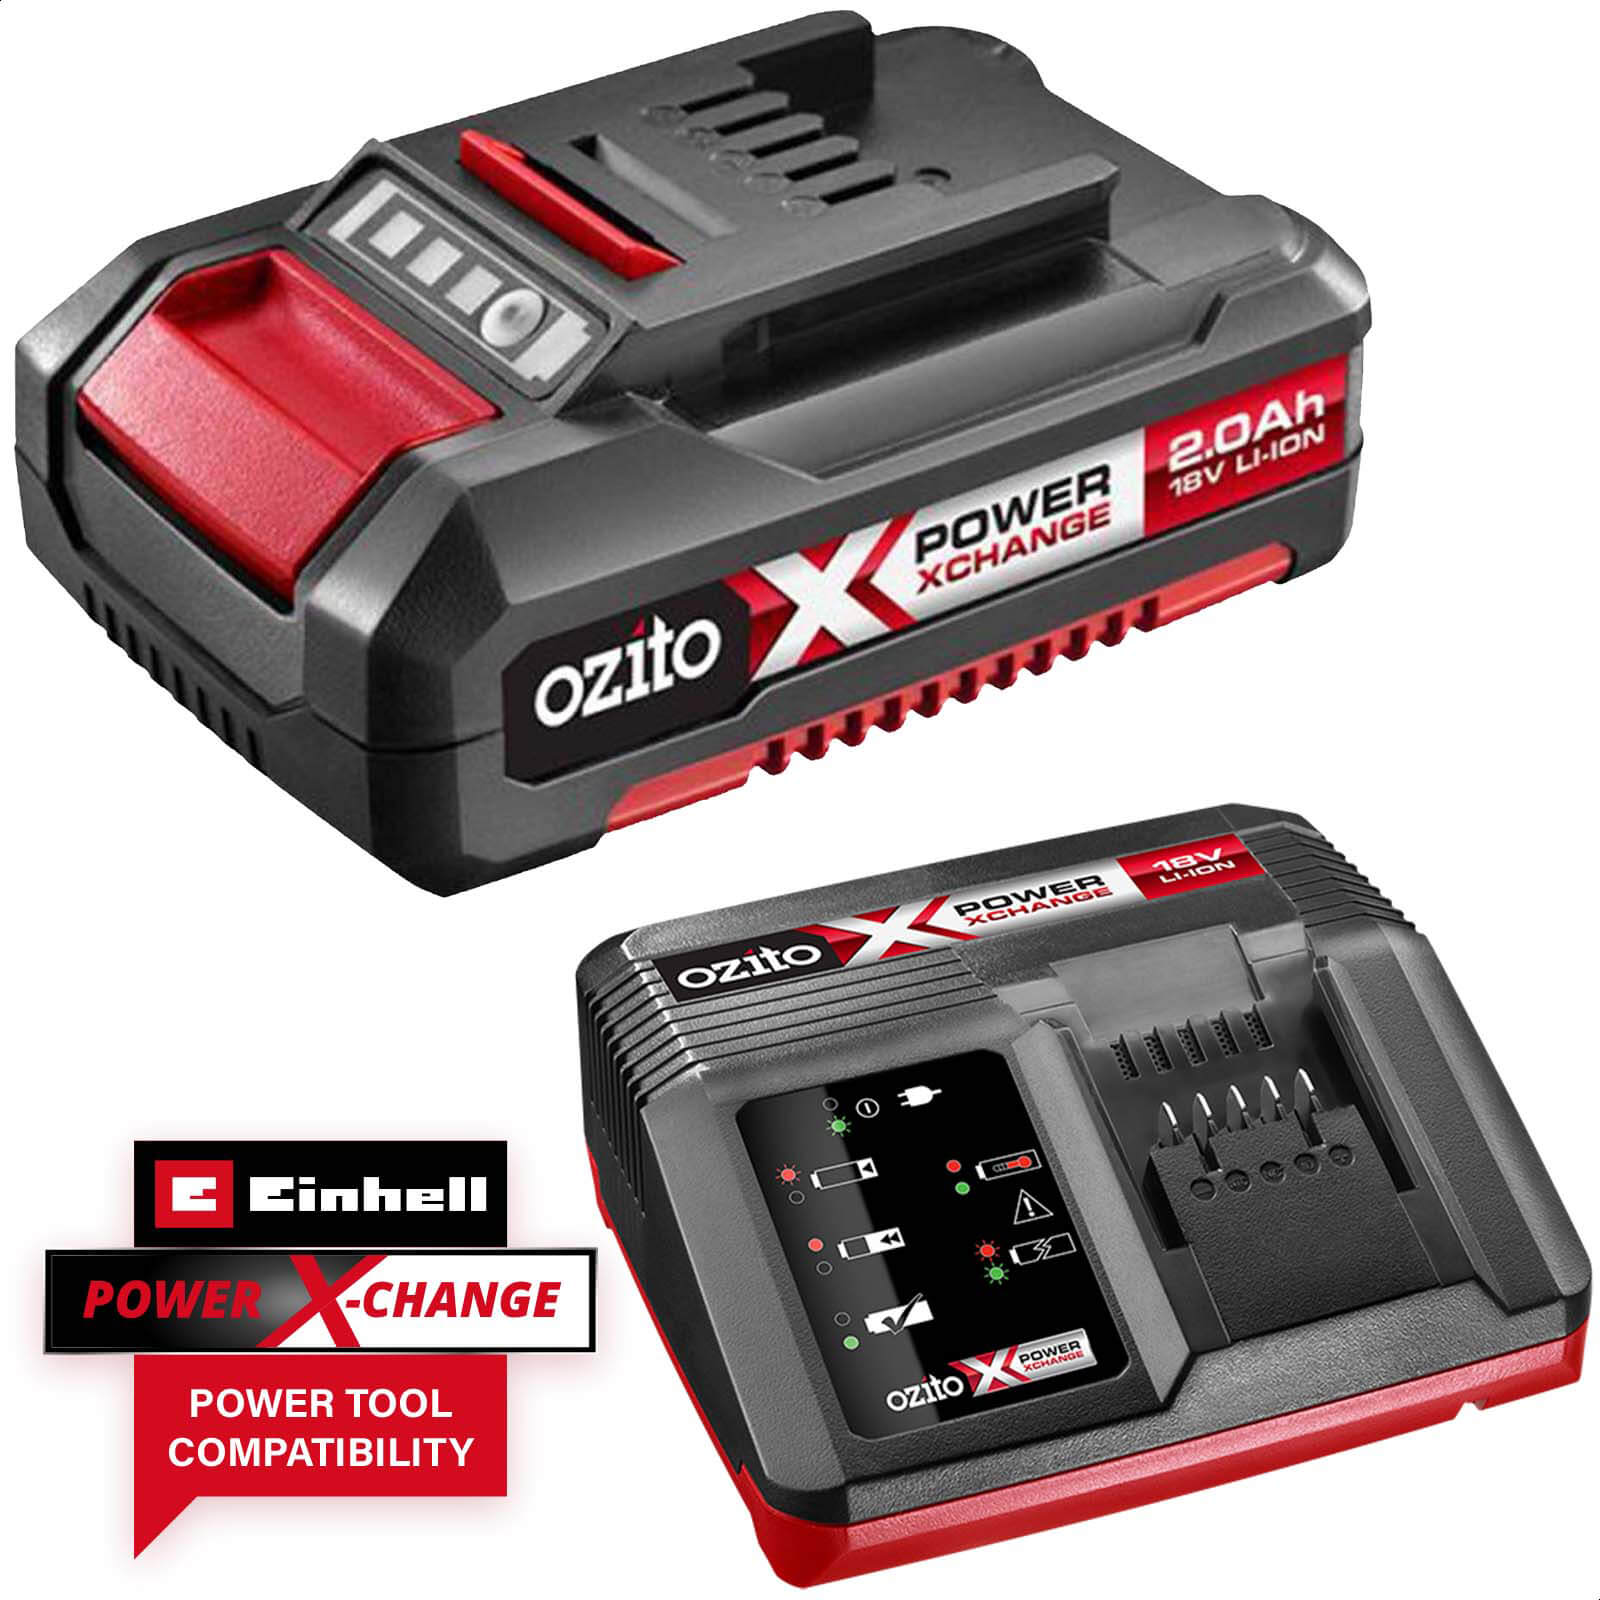 Image of Ozito Genuine 18v Cordless Power X-Change Li-ion Battery 2ah and Fast Charger 2ah